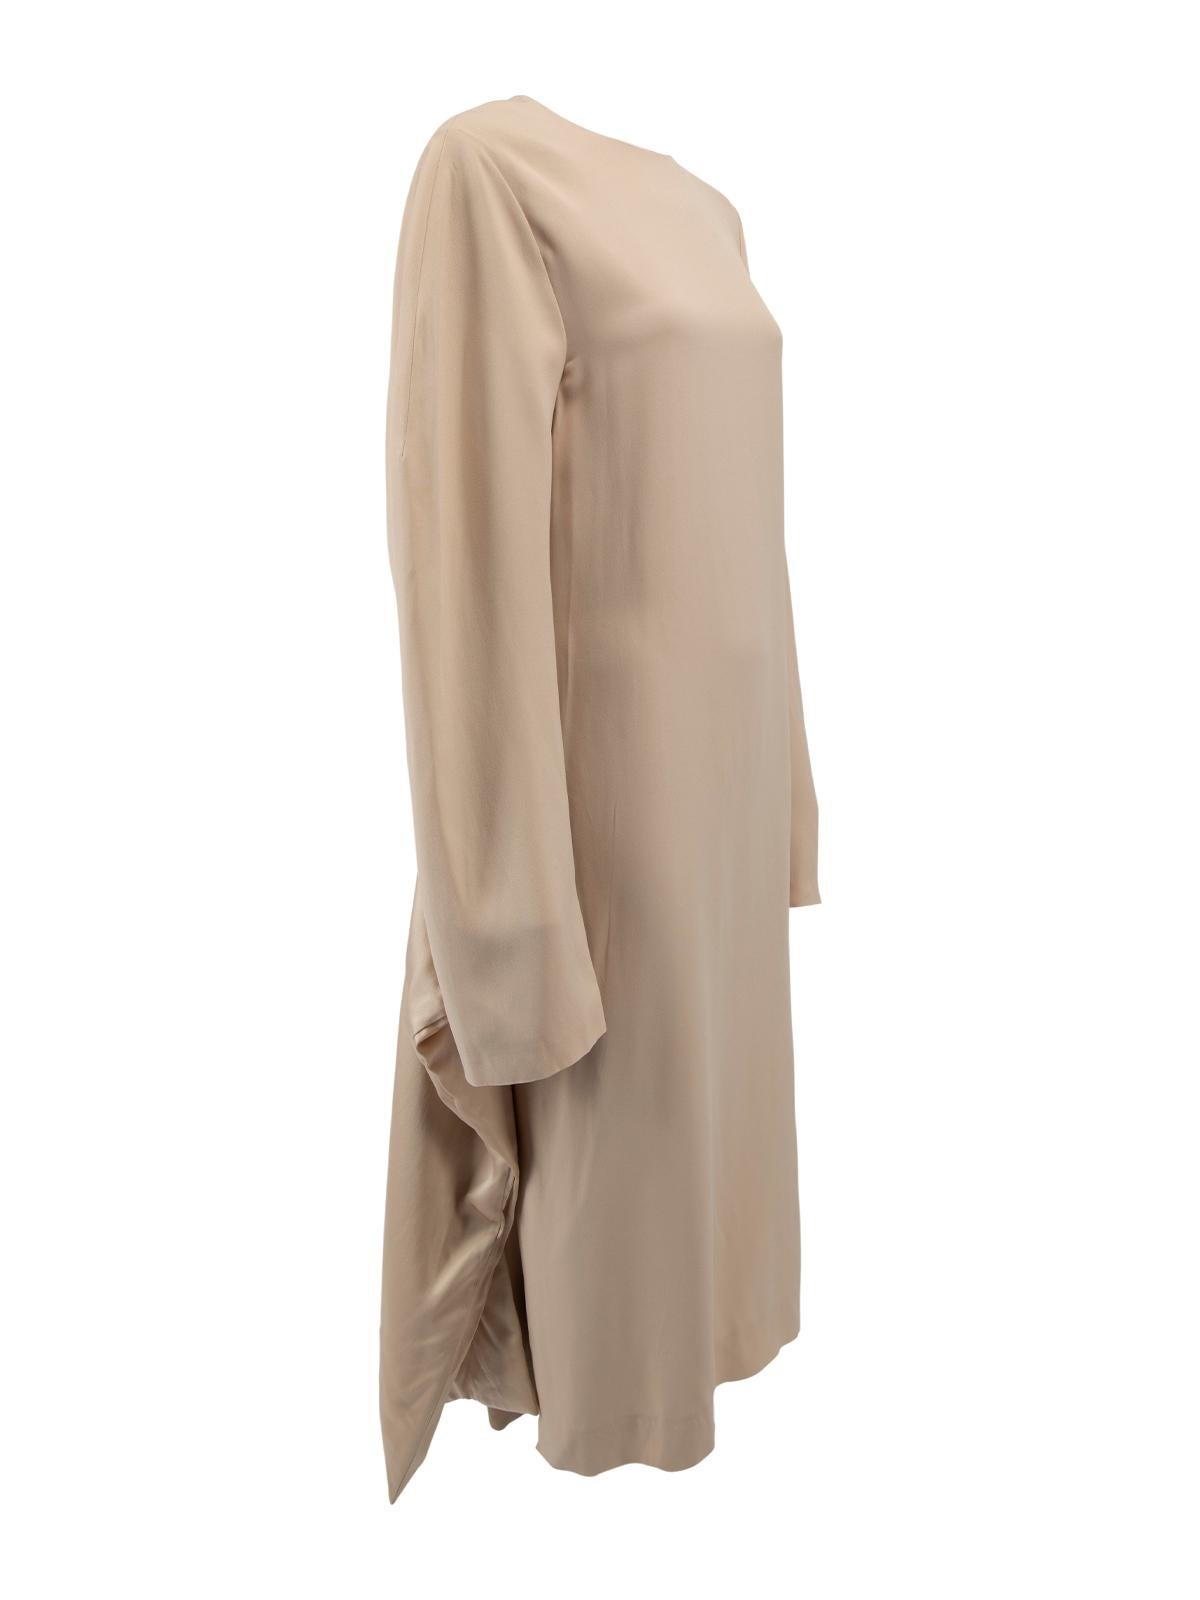 CONDITION is Never worn with tags. No visible wear to dress is evident on this Jil Sander designer resale item.
 
 Details
 Nude/Pastel pink
 Silk
 Maxi dress
 Oversized
 Long wide sleeves
 Round neckline
 Shoulder zip fastening
 Padded belt tie on